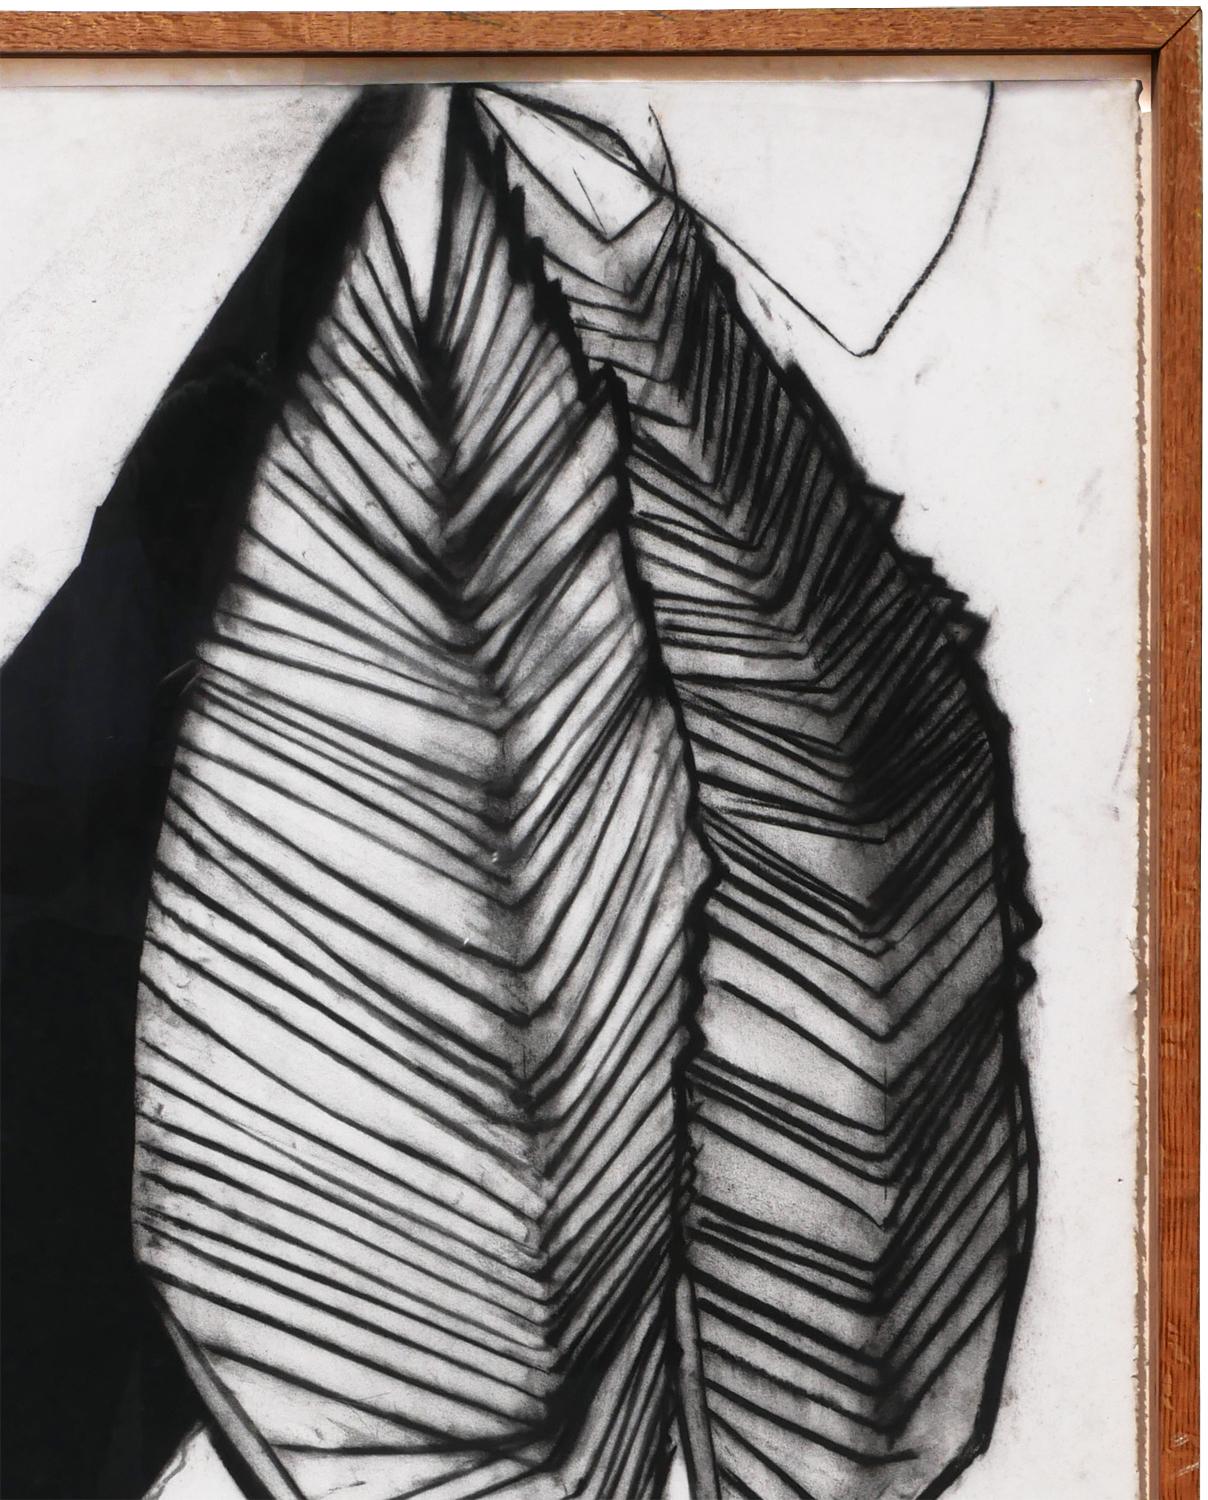 Black and white abstract charcoal drawing by Houston artist Paul Forsythe. The work features a large, abstract, organic shape in the upper right corner of the composition. Currently hung in a light wood floating frame. 

Dimensions With Frame: H